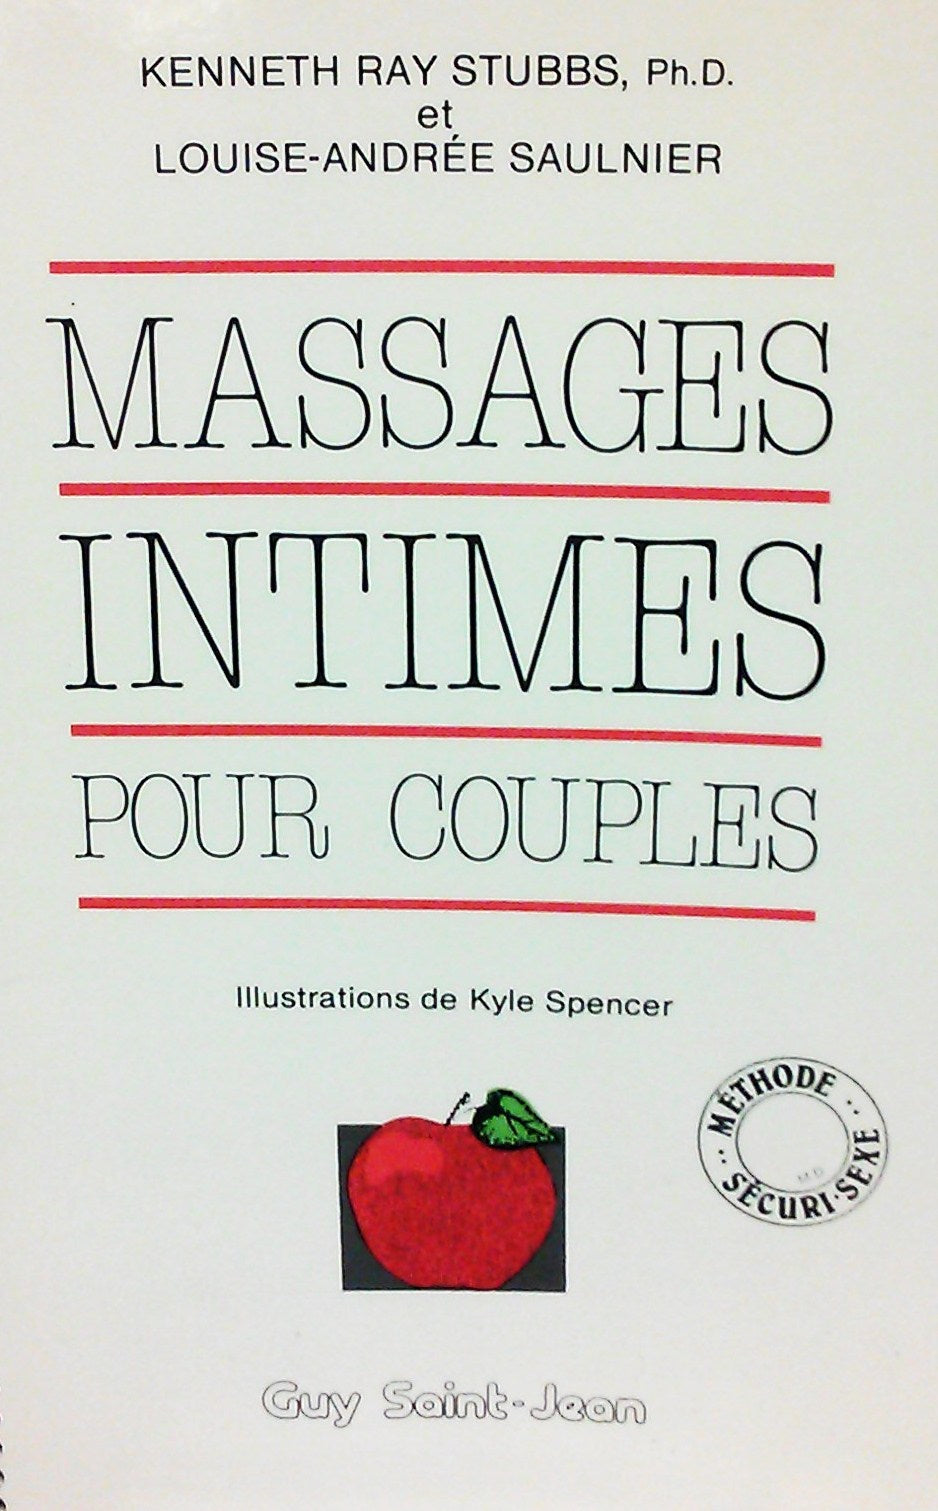 Massages intimes pour couples - Kenneth Ray Stubbs